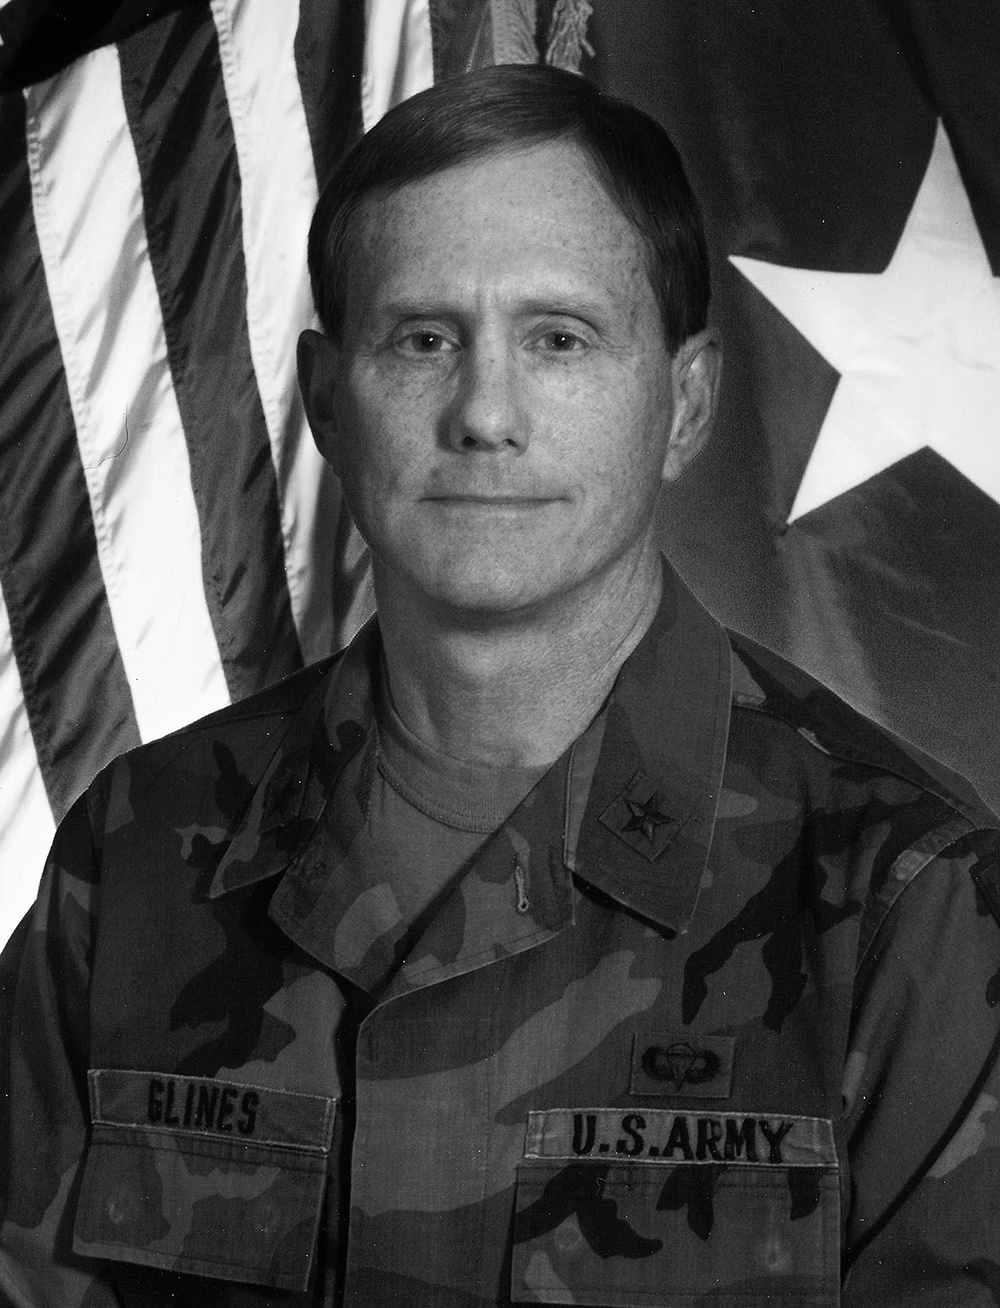 Retired brigadier general nears second retirement after 46 years